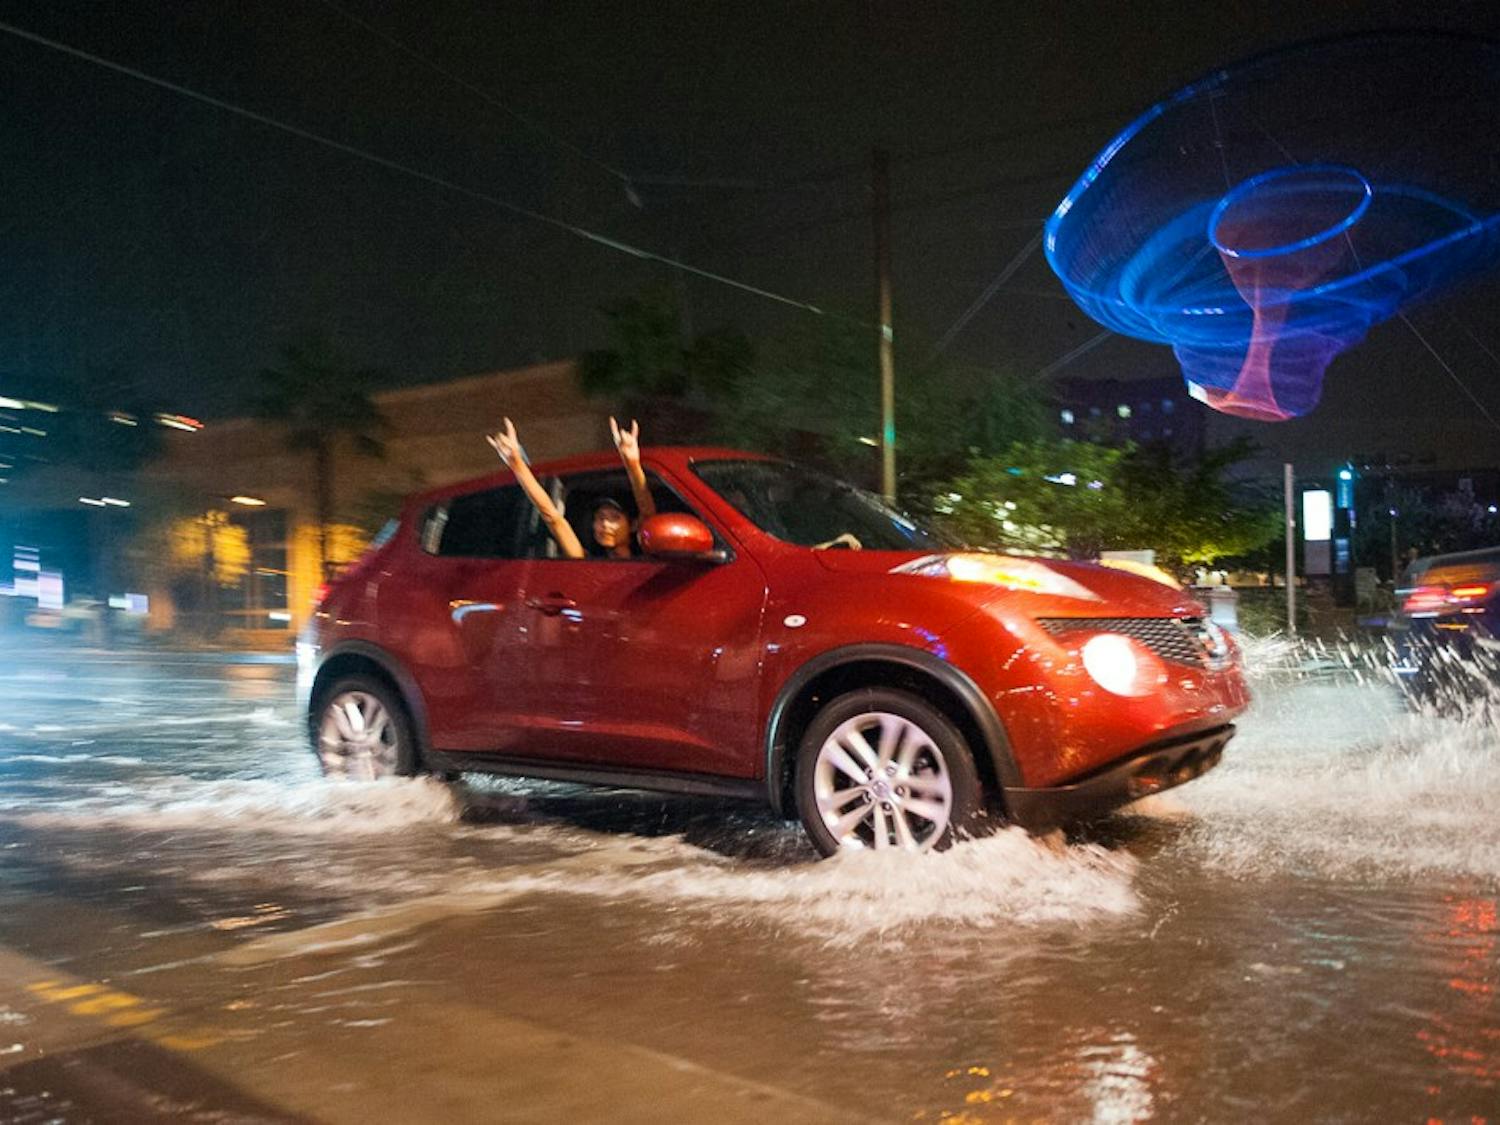 Rain pounds downtown Phoenix on Monday, Aug. 31, 2015. The downtown area received almost an inch of rain in an hour.